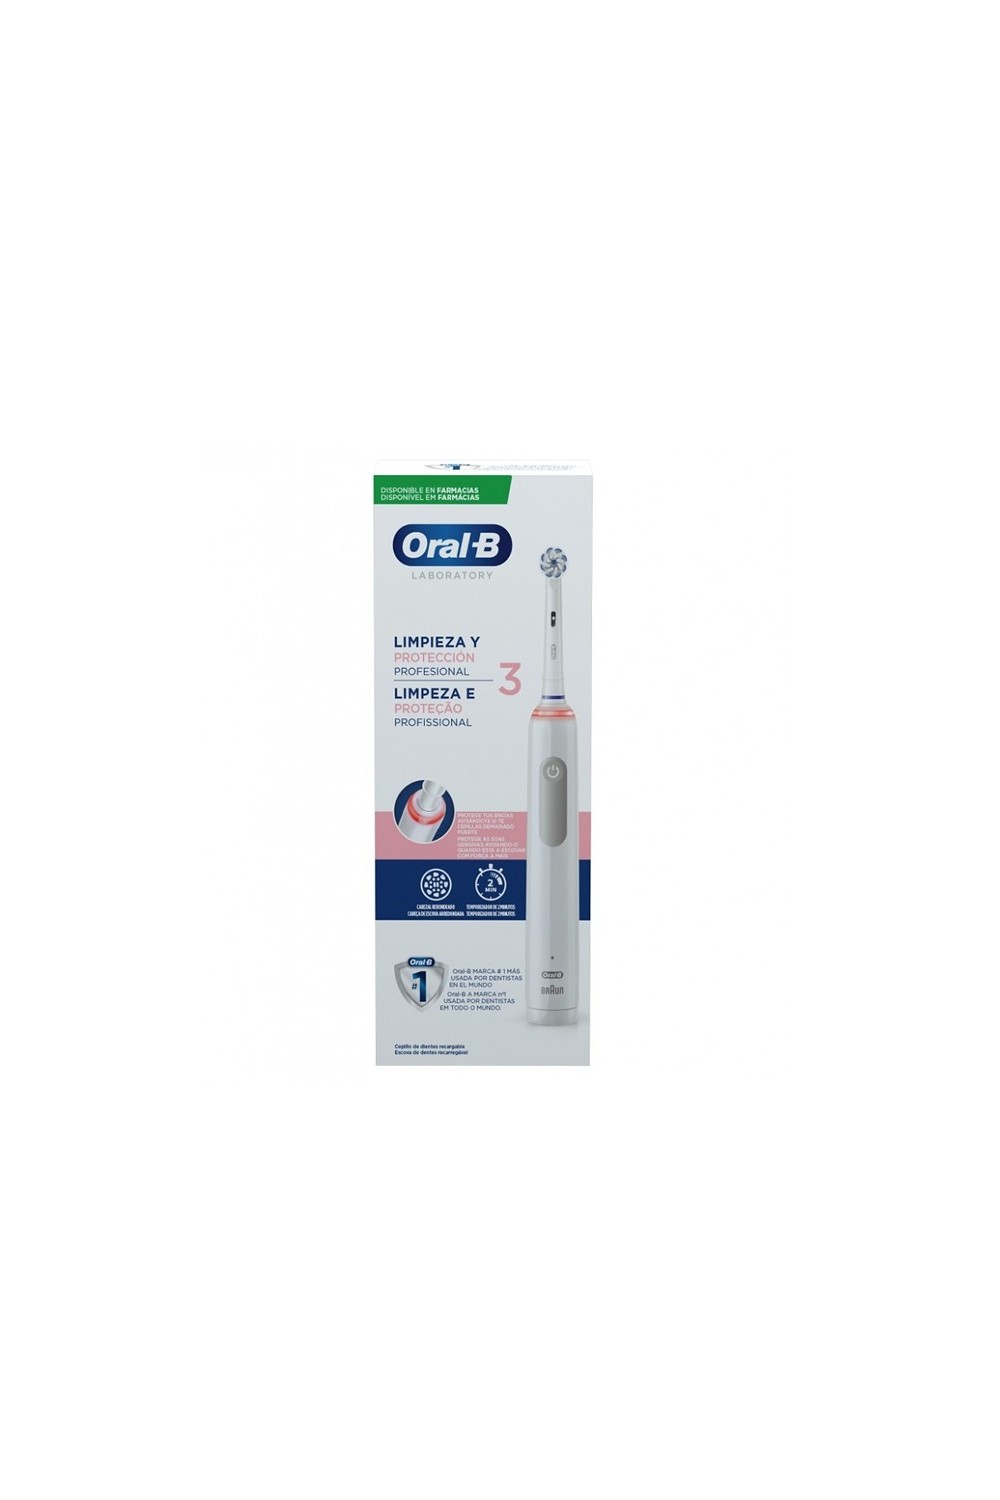 ORAL-B - Oral B Professional Clean & Protect 3 Electric Toothbrush